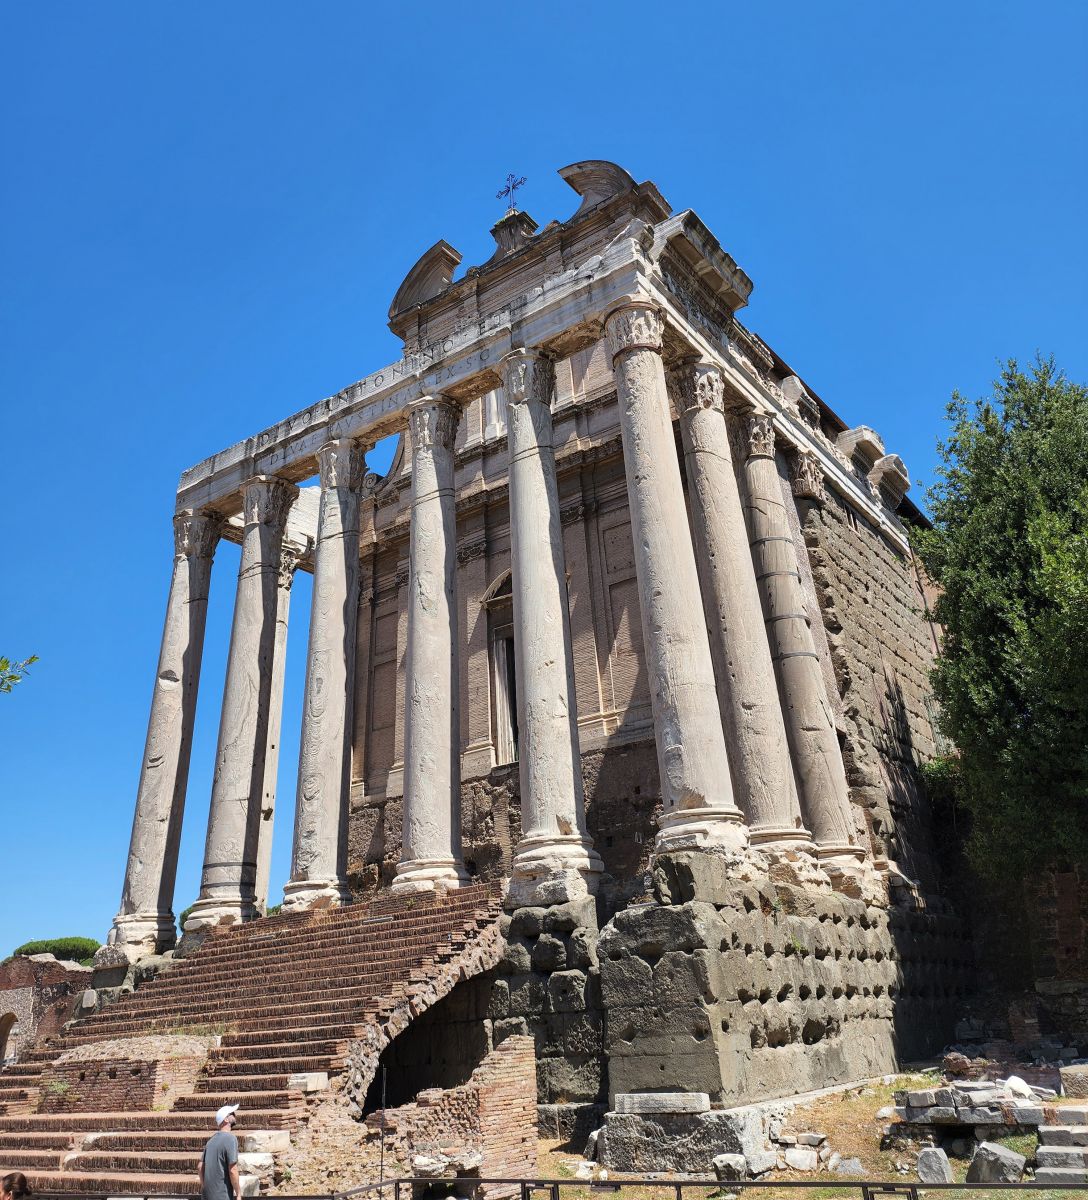 Canonbury Antiques Grand Tour - The Forum Roman Ruins and Classical Temple